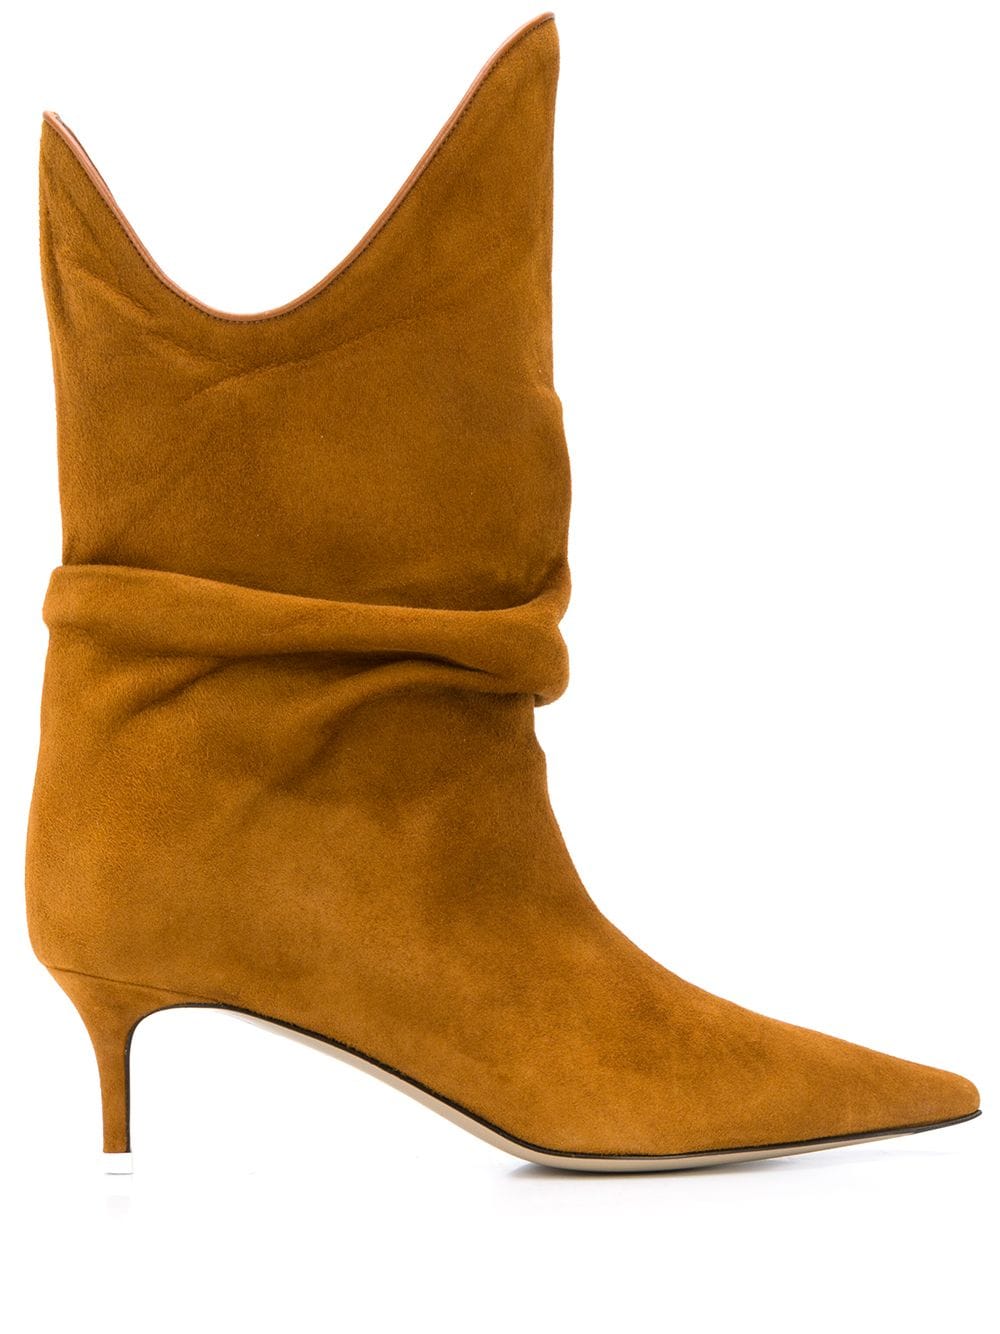 Suede Ankle Boots дамски обувки The Attico 846643344_37_5